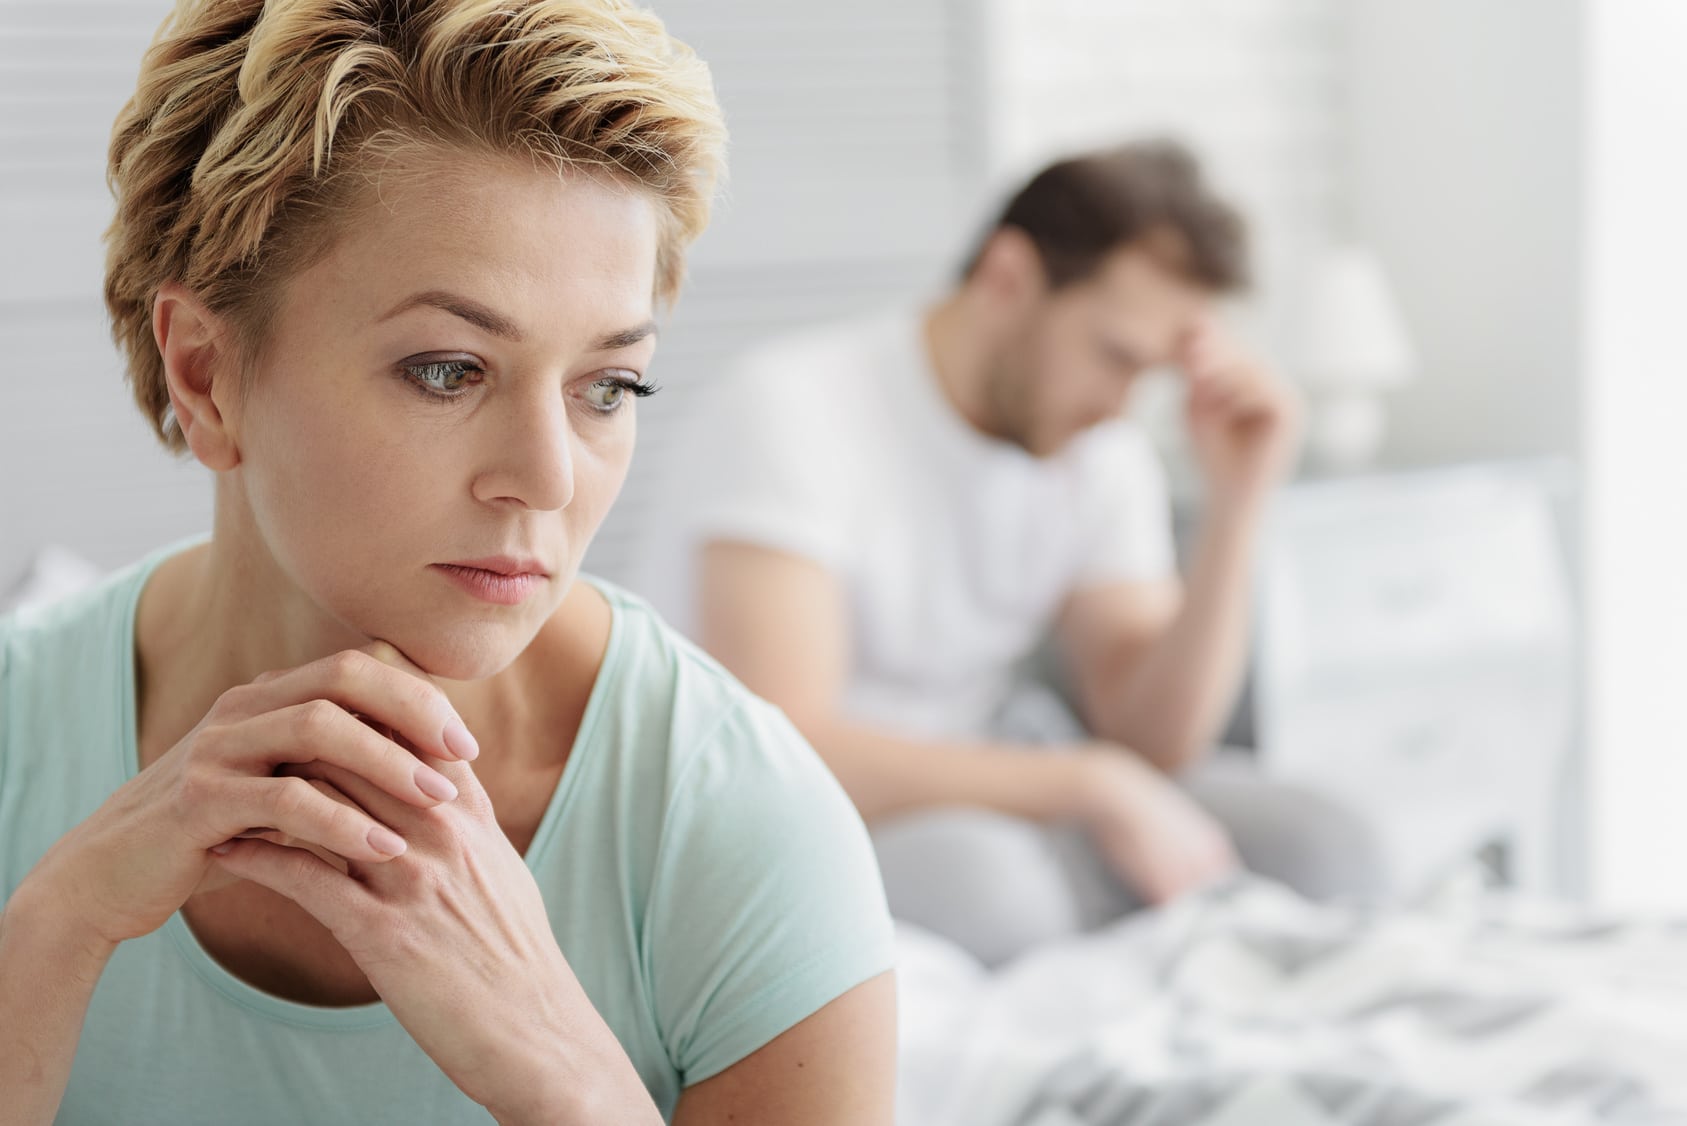 Could Anxious Attachment be Causing Your Relationship Problems?